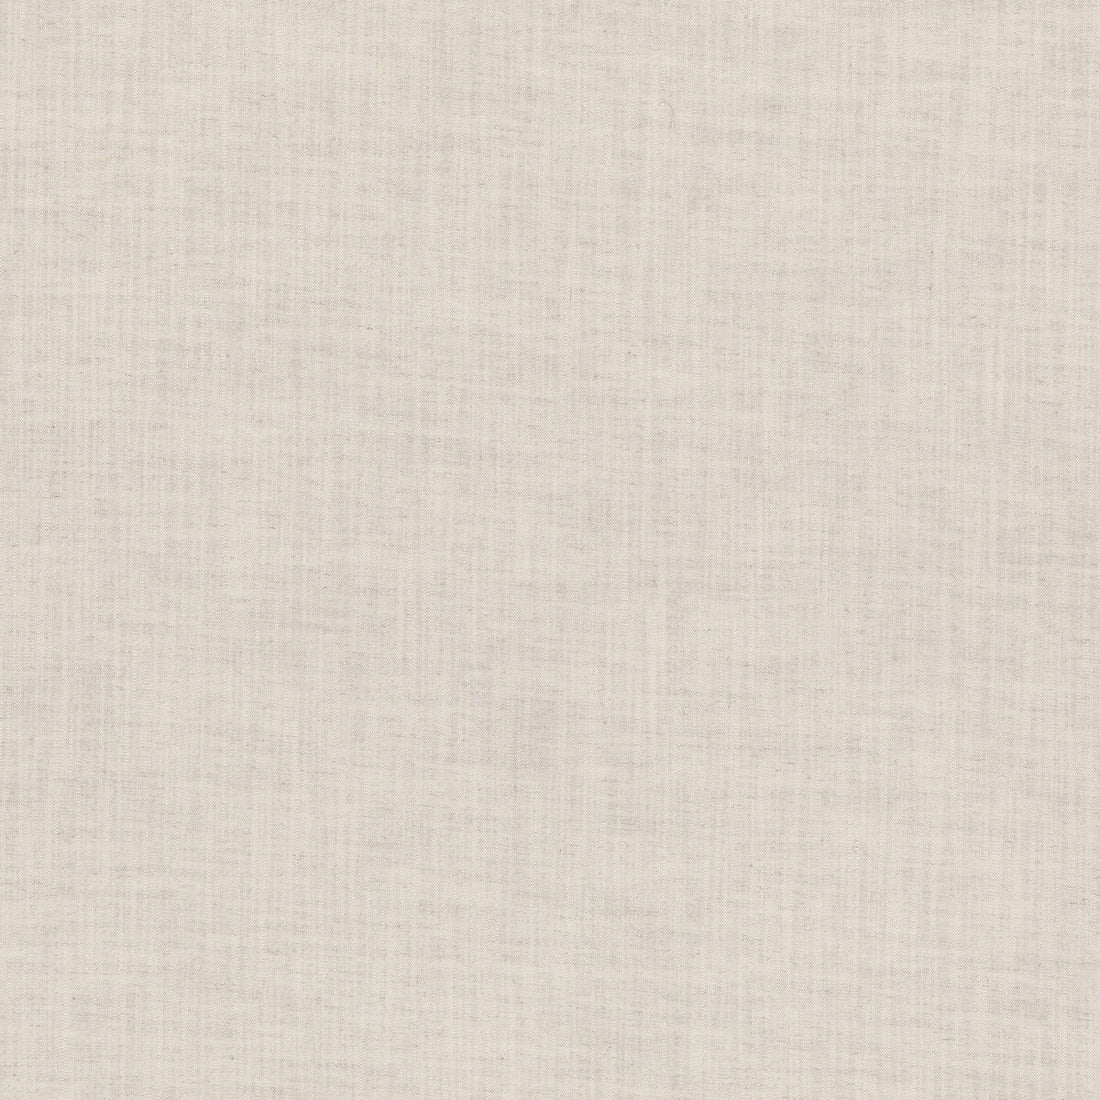 Omega fabric in linen color - pattern ED85380.110.0 - by Threads in the Quintessential Textures collection